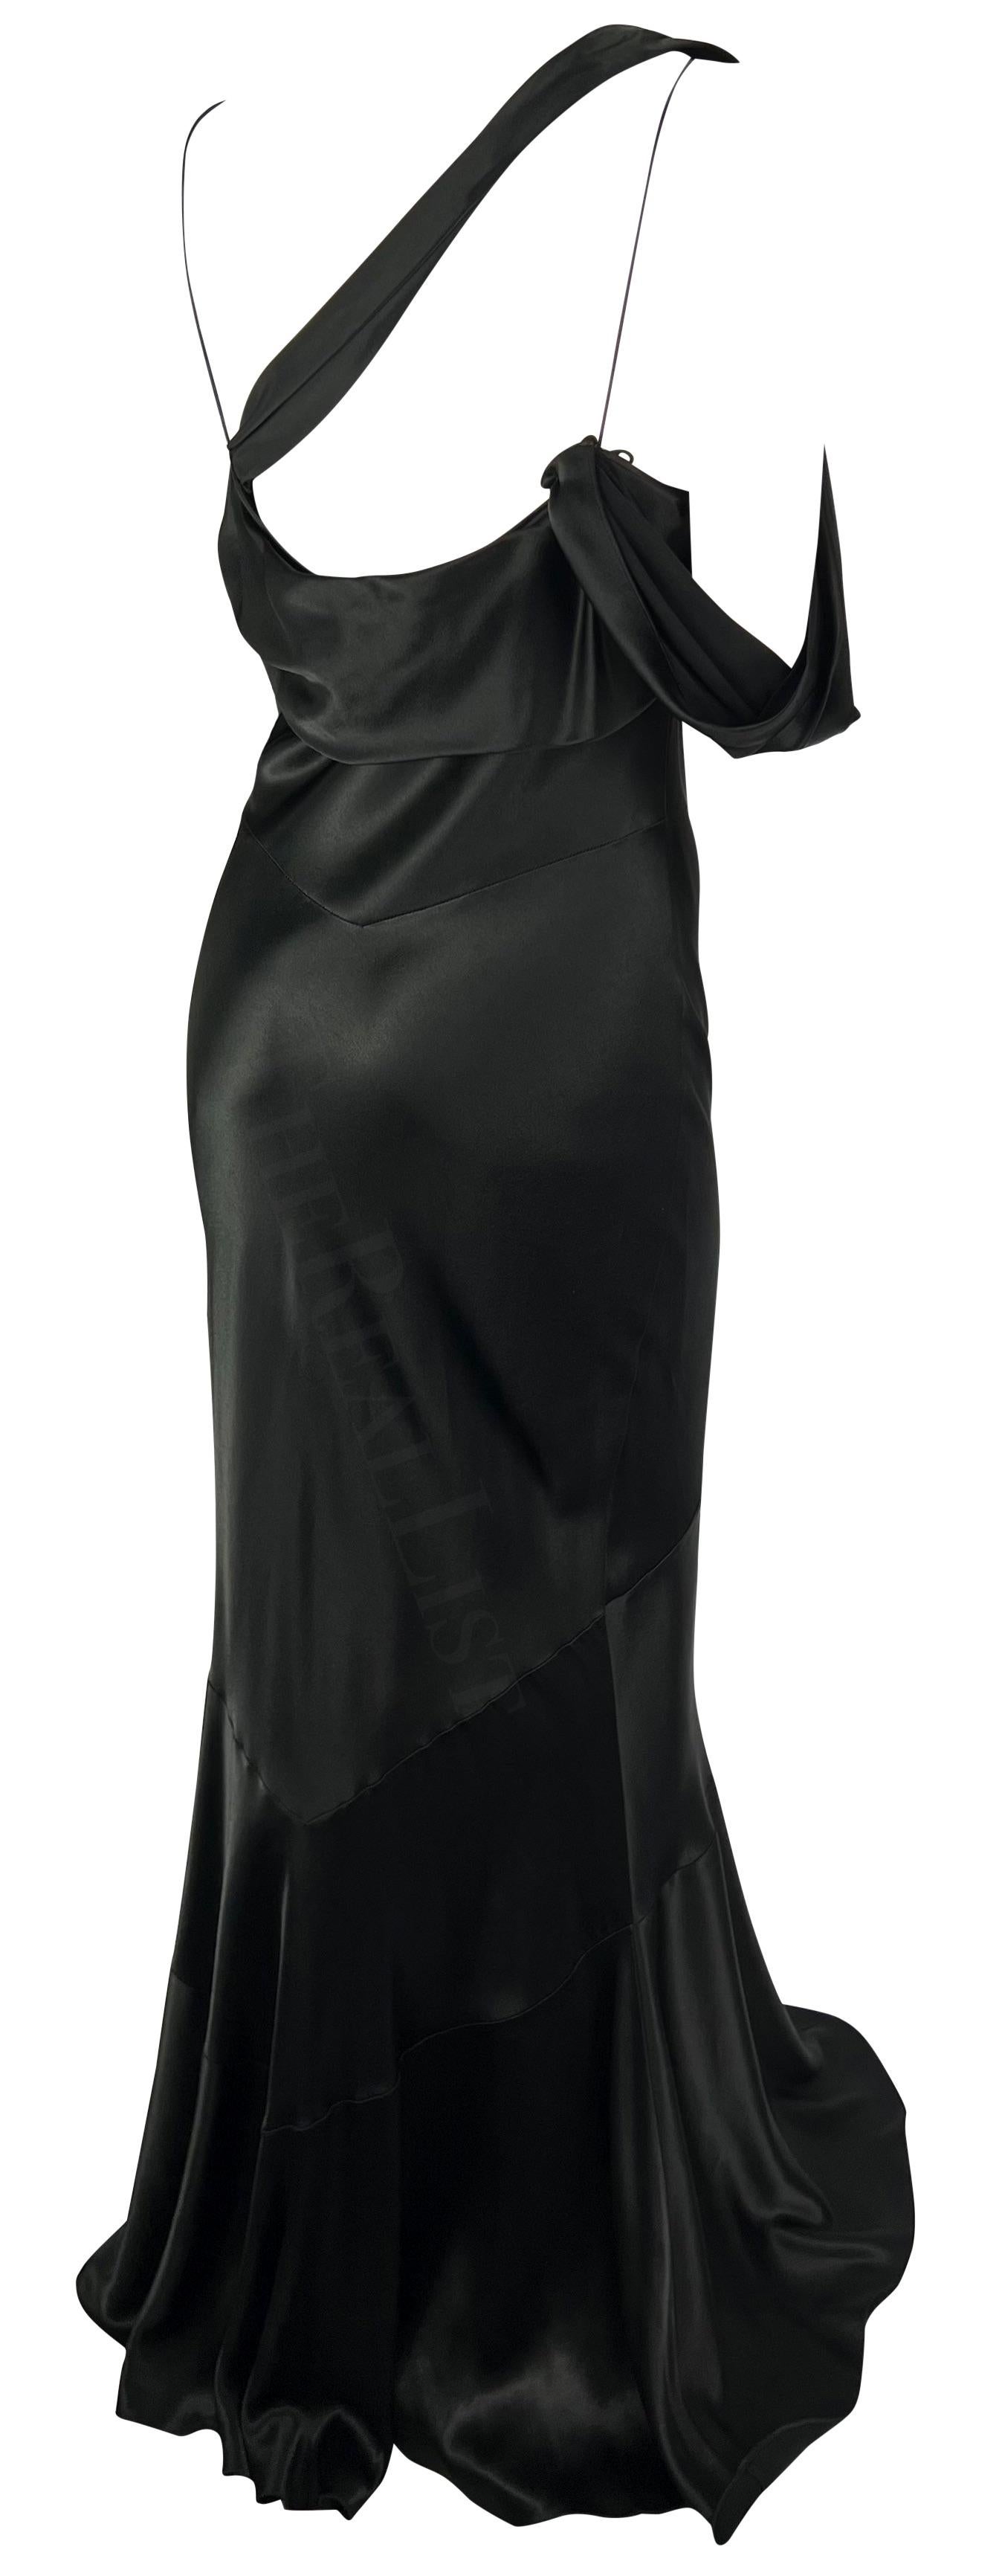 F/W 2006 John Galliano Black Satin Floor Length Bias-Cut Asymmetric Gown  In Excellent Condition For Sale In West Hollywood, CA